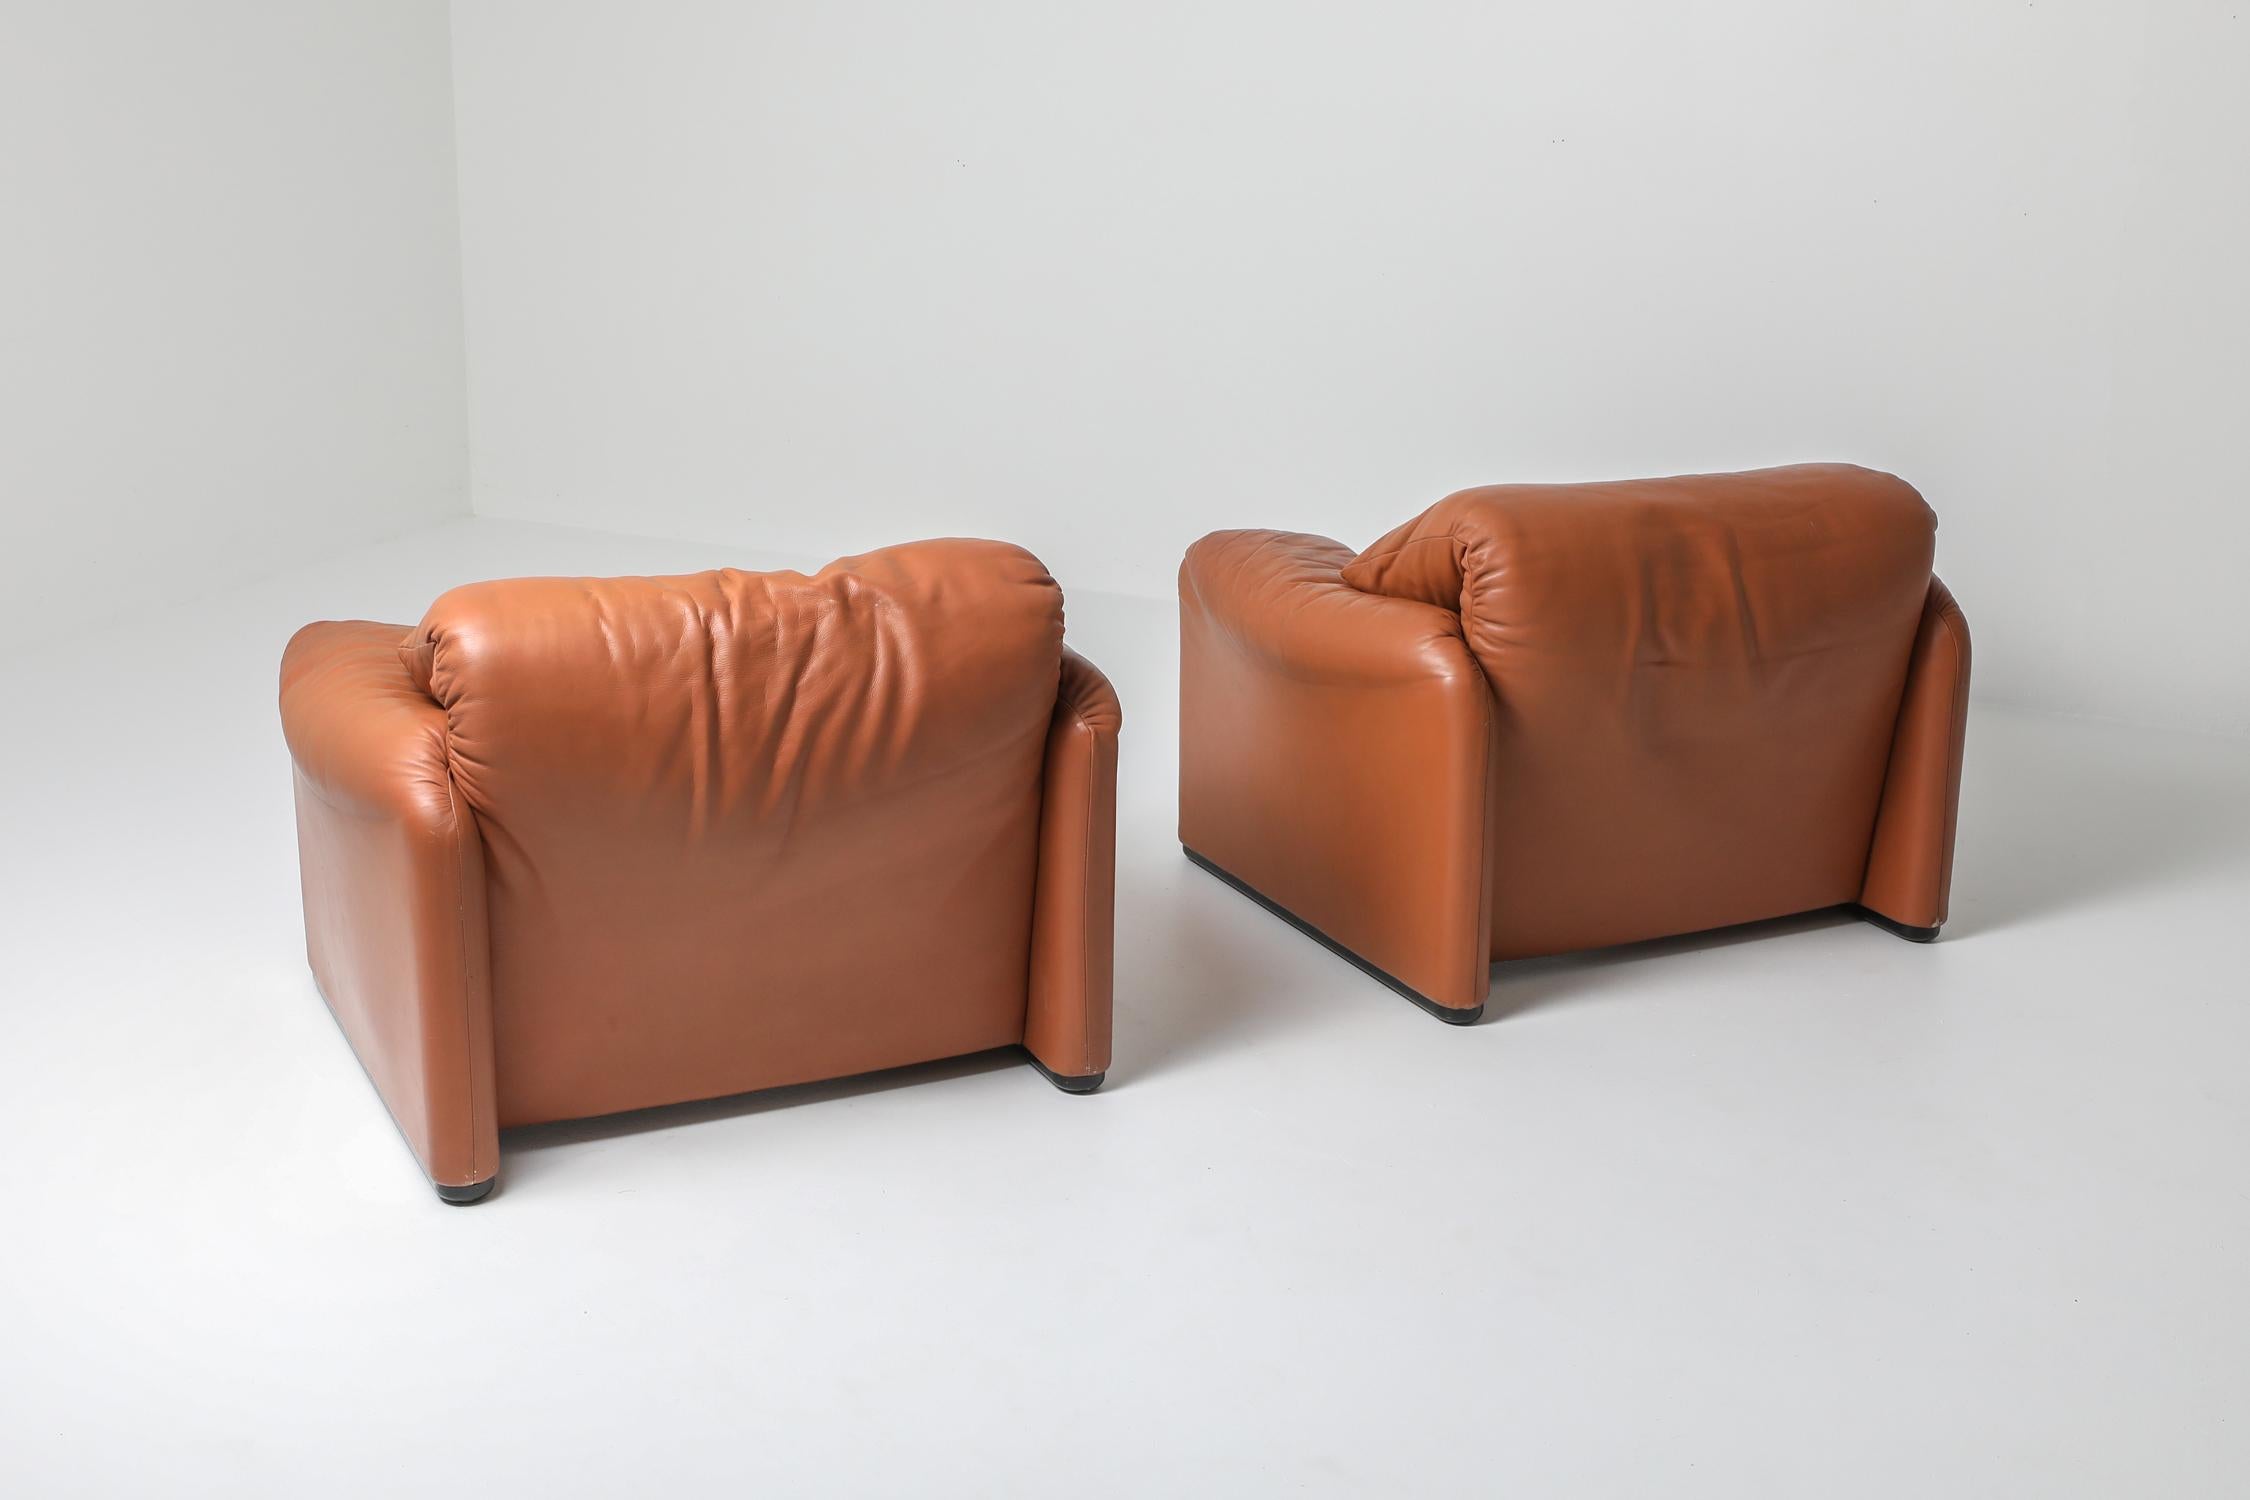 20th Century Maralunga Cognac Chairs by Vico Magistretti for Cassina, 1974